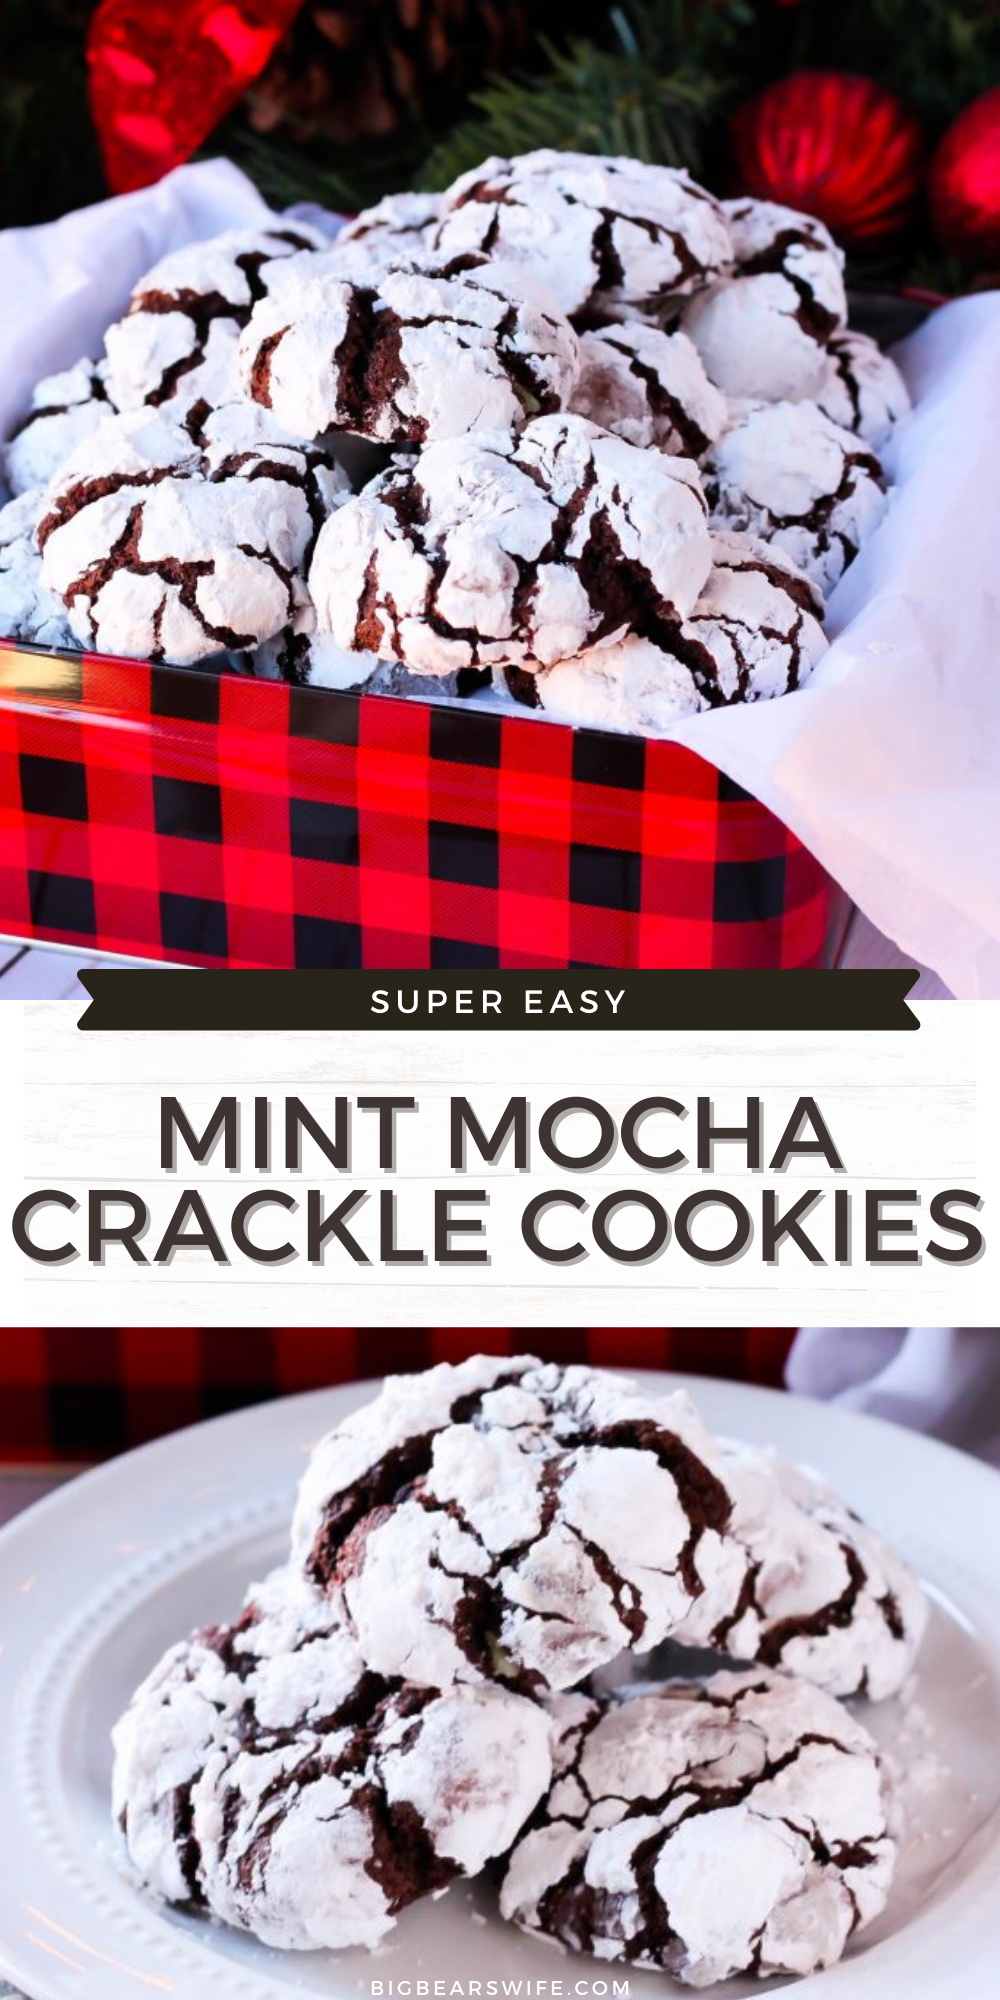 Chocolate Crackle cookies with a minty twist for the holidays! These Mint Mocha Crackle Cookies would be perfect for Santa!  via @bigbearswife